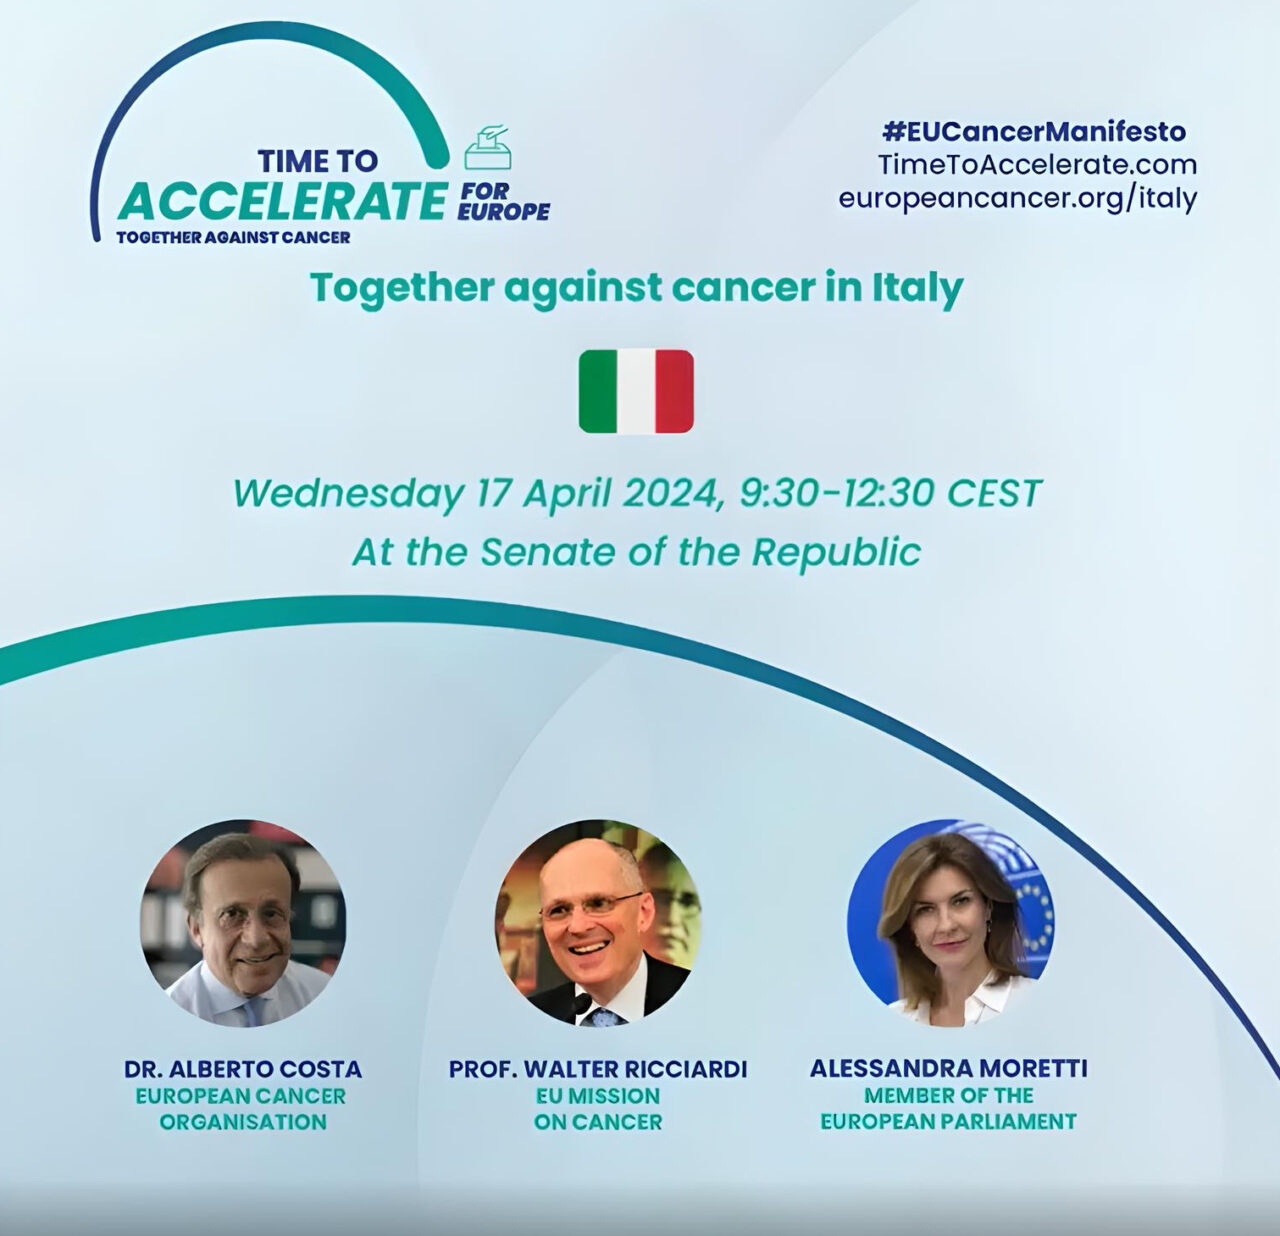 European Cancer Organisation – How can we improve cancer screening, prevention and access to treatment in Italy?